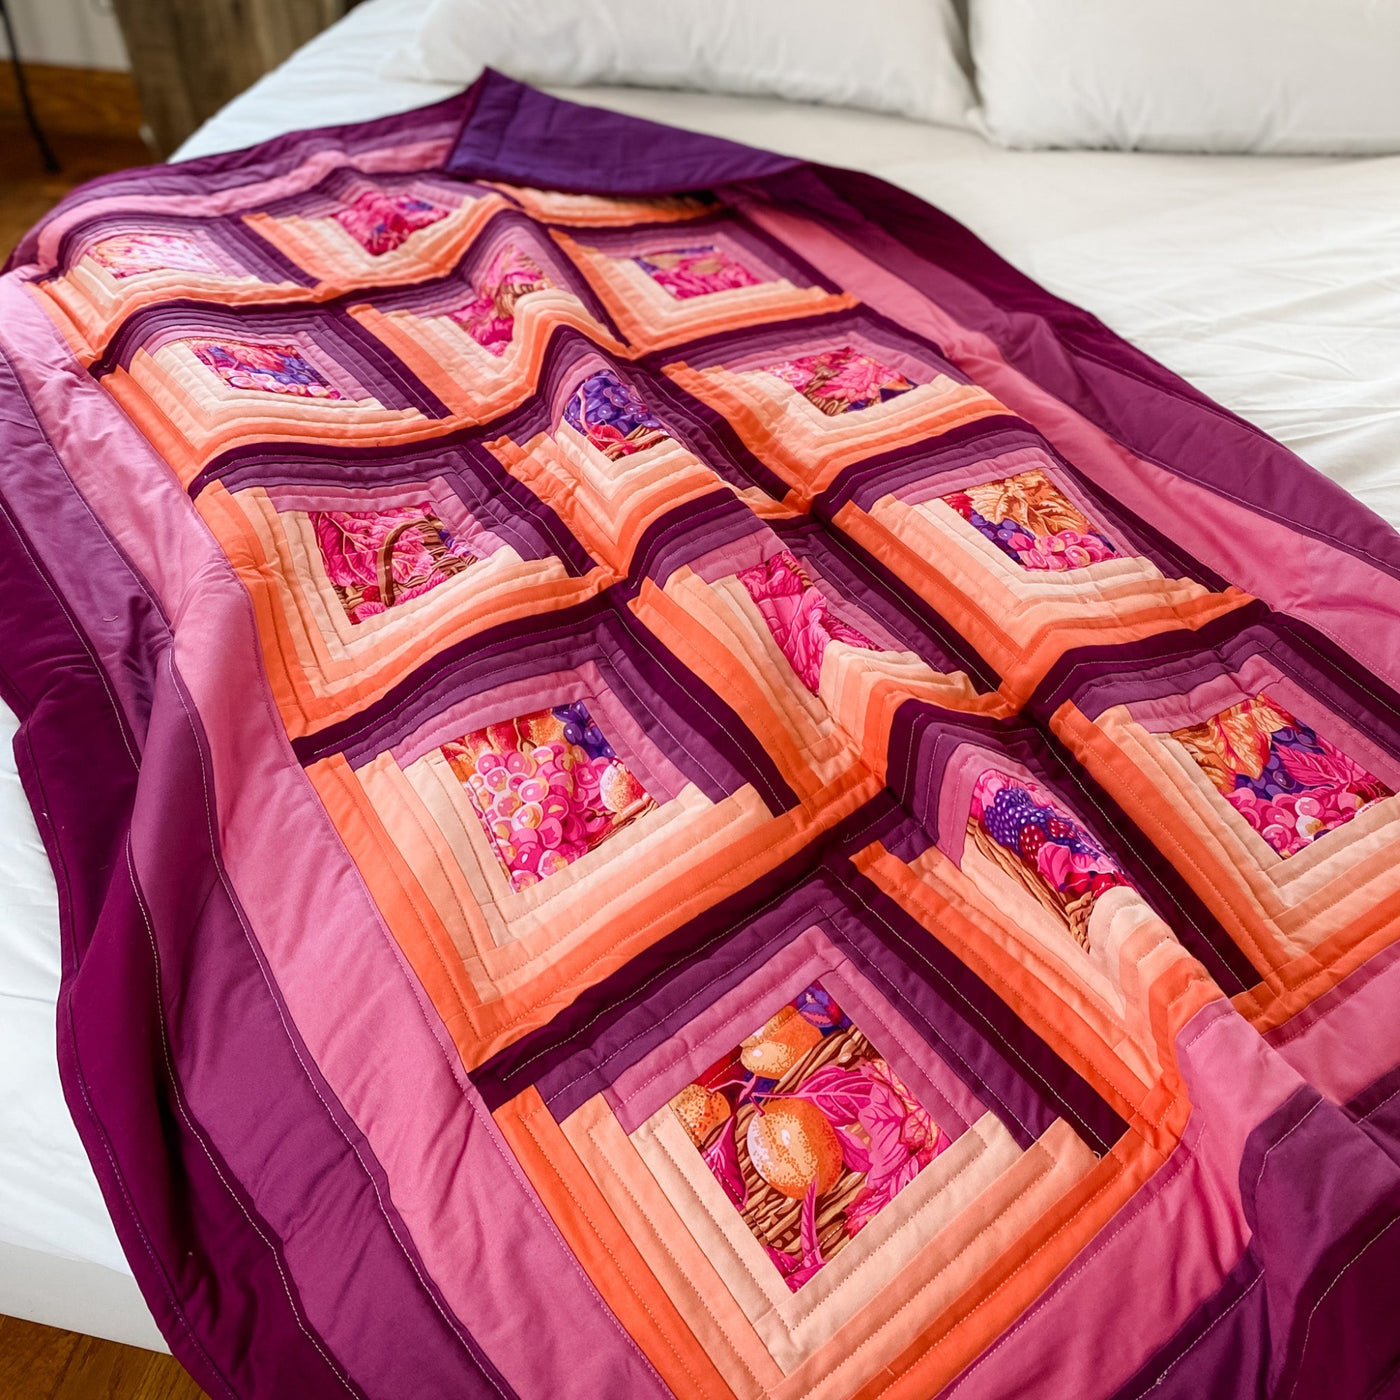 A brightly colored purple and orange colored quilt. It is a handmade, patchwork, log cabin style lap quilt